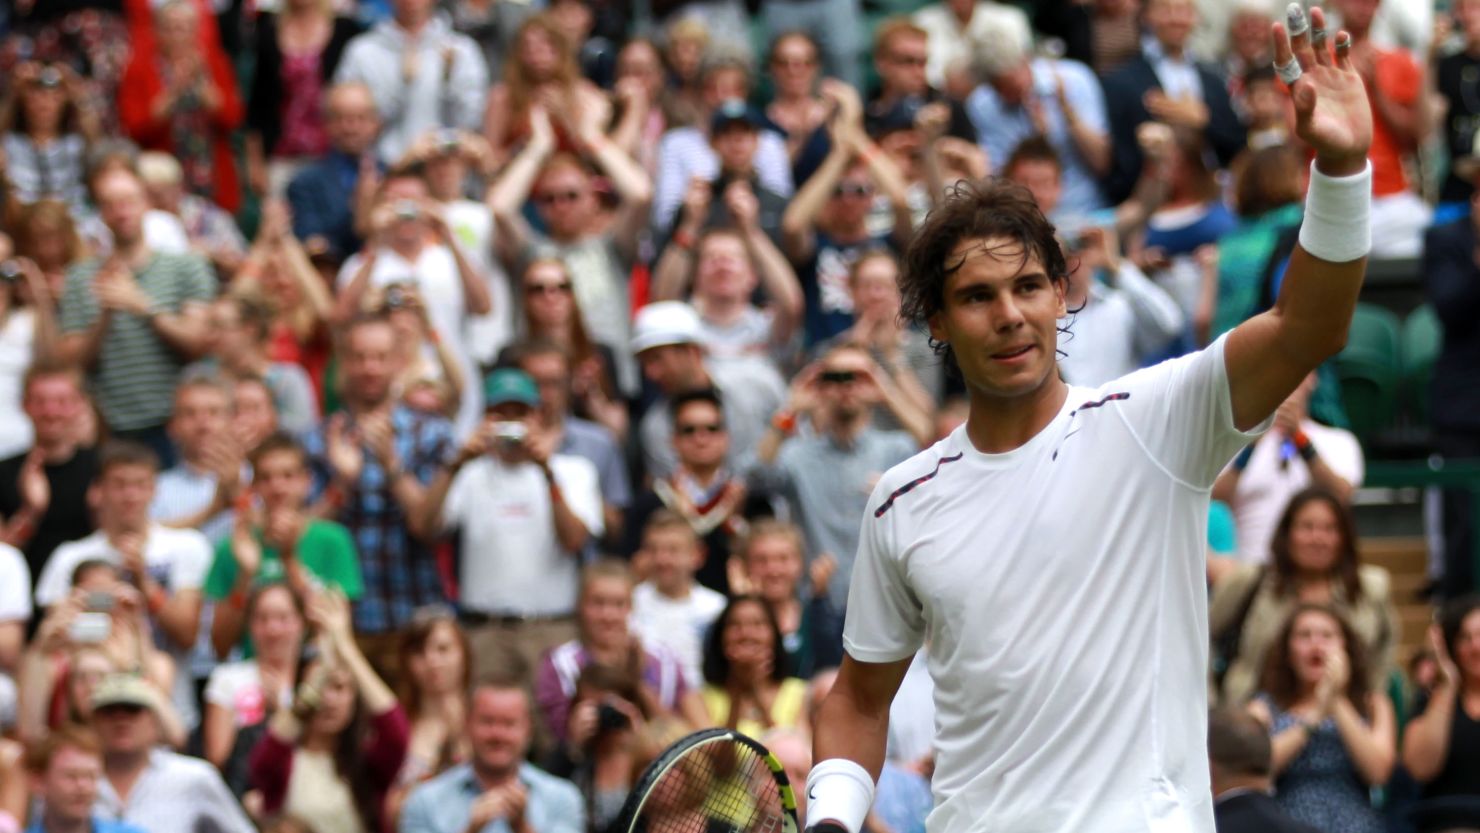 Rafael Nadal has not played competitive tennis since Wimbledon, where he made an unexpected exit in the second round.